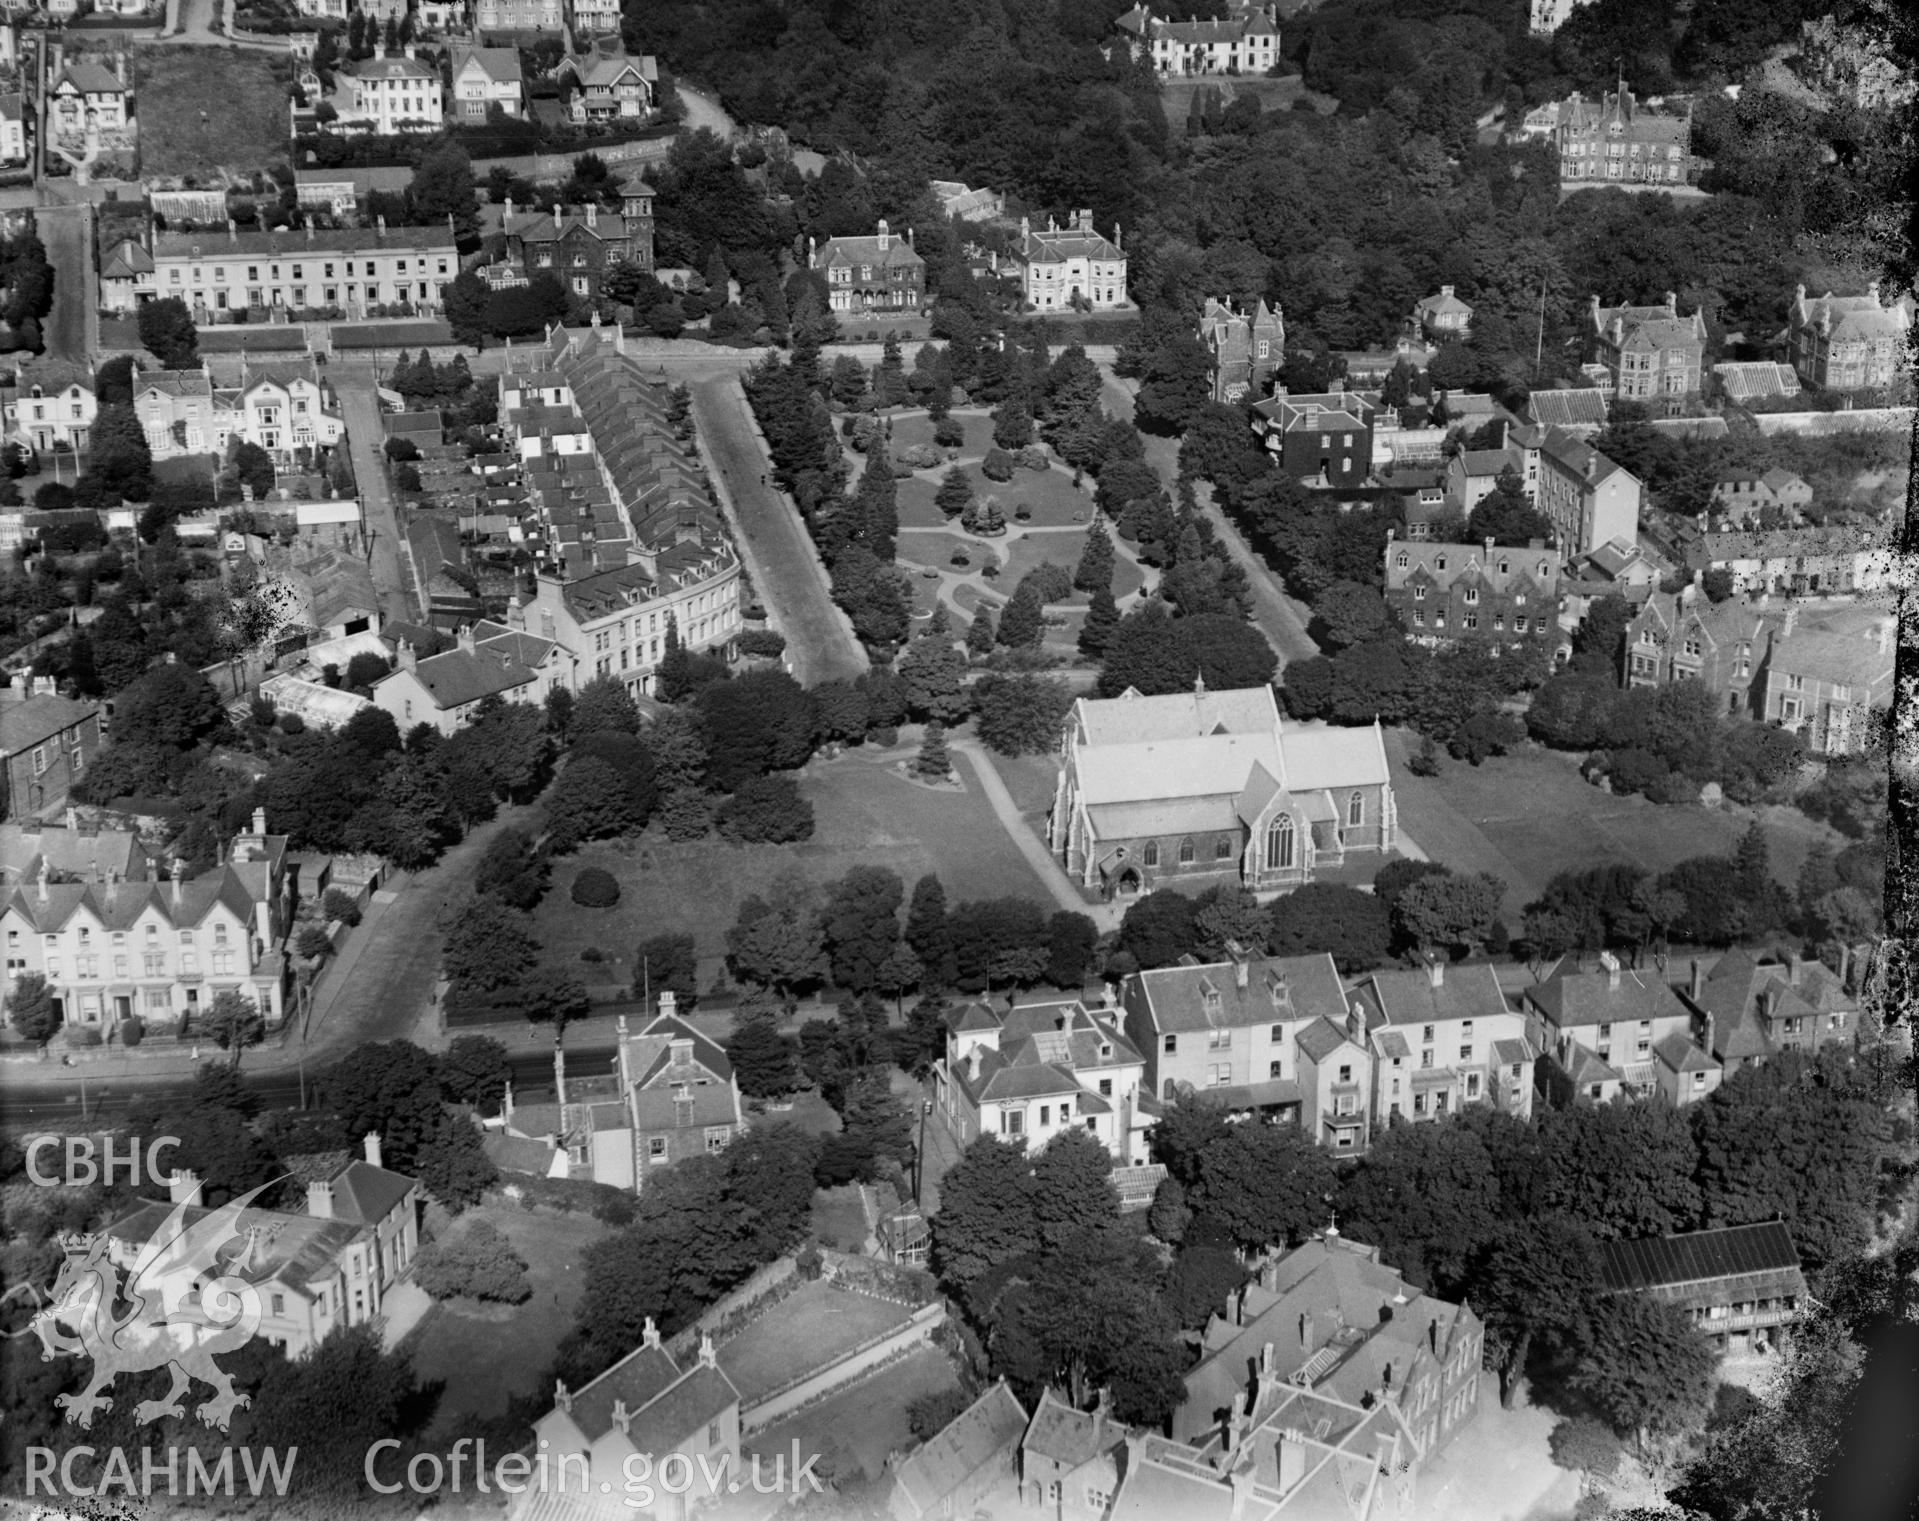 View of St James Church, gardens and crescent, Swansea, oblique aerial view. 5?x4? black and white glass plate negative.